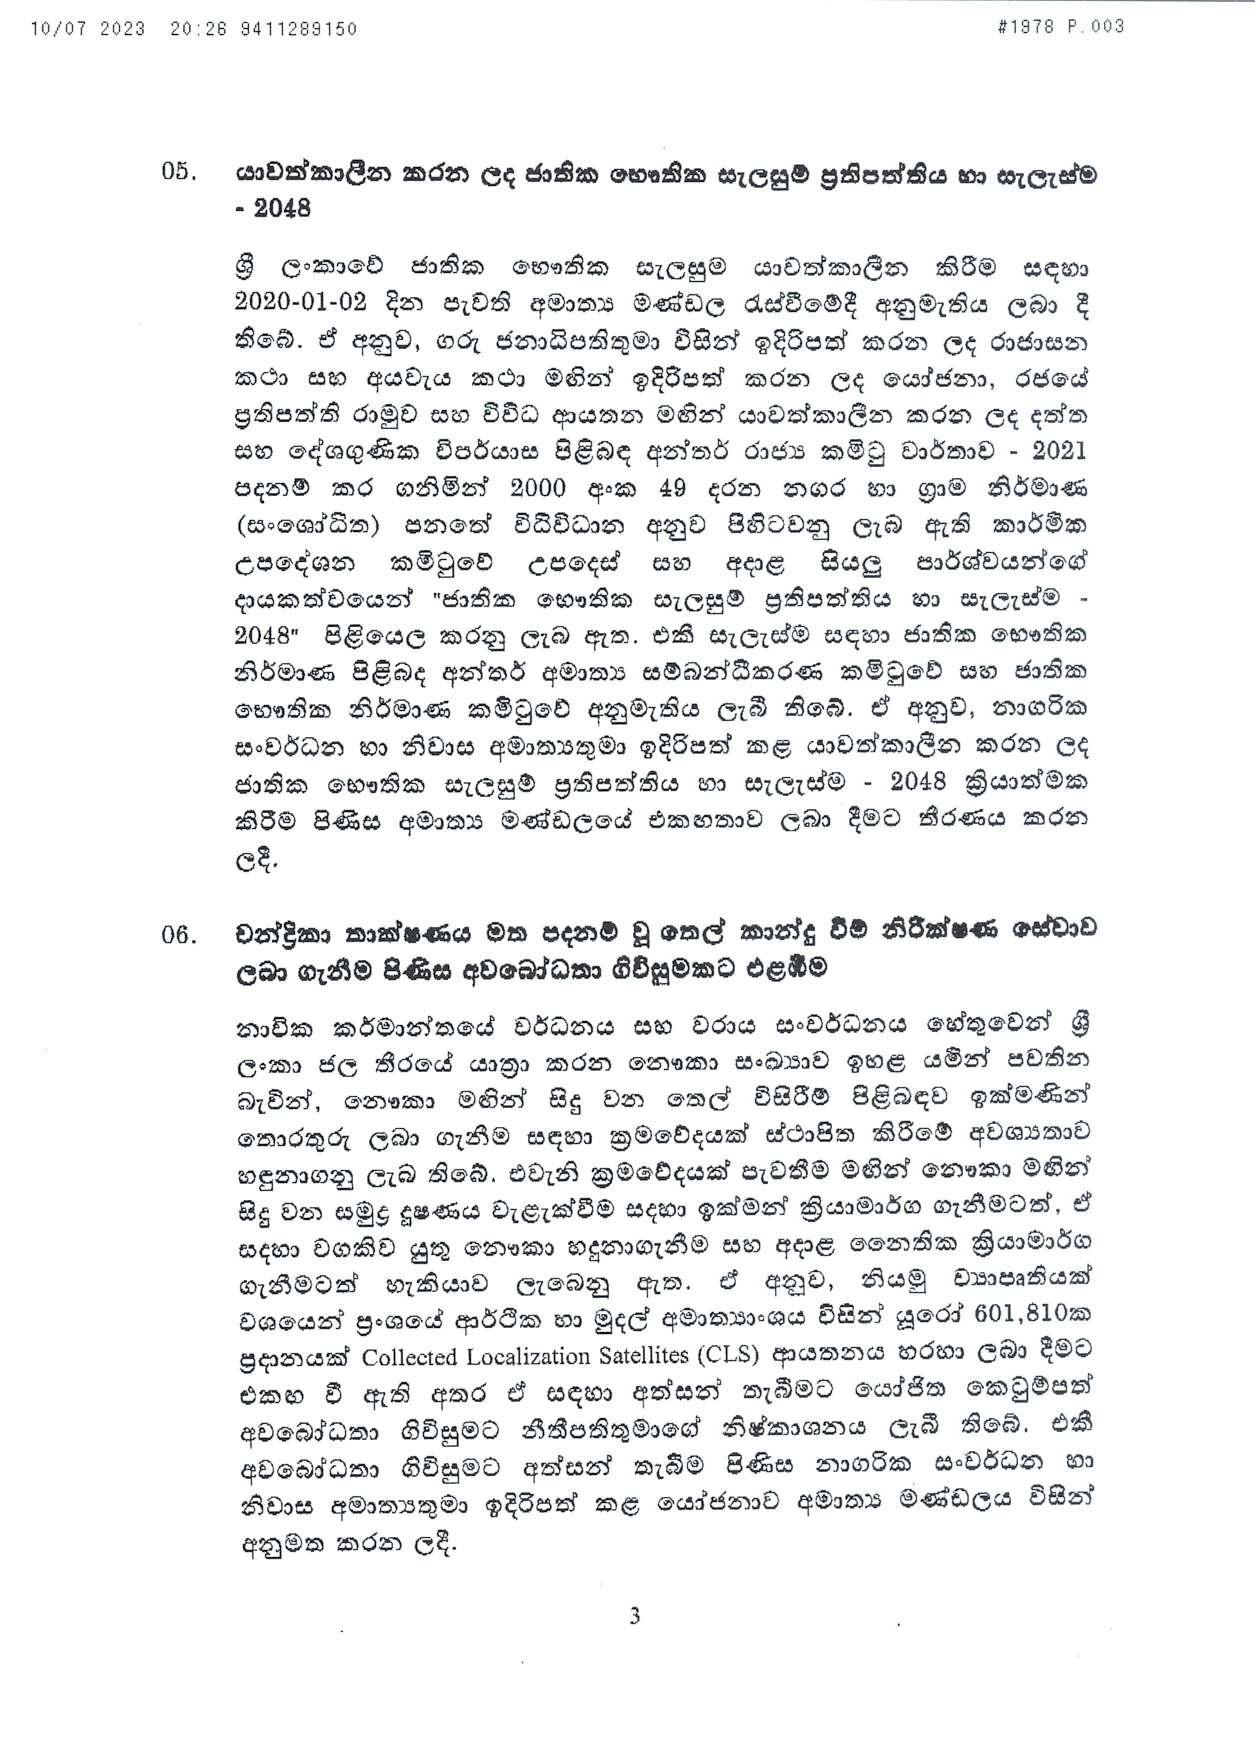 Cabinet Decision on 10.07.2023d page 003